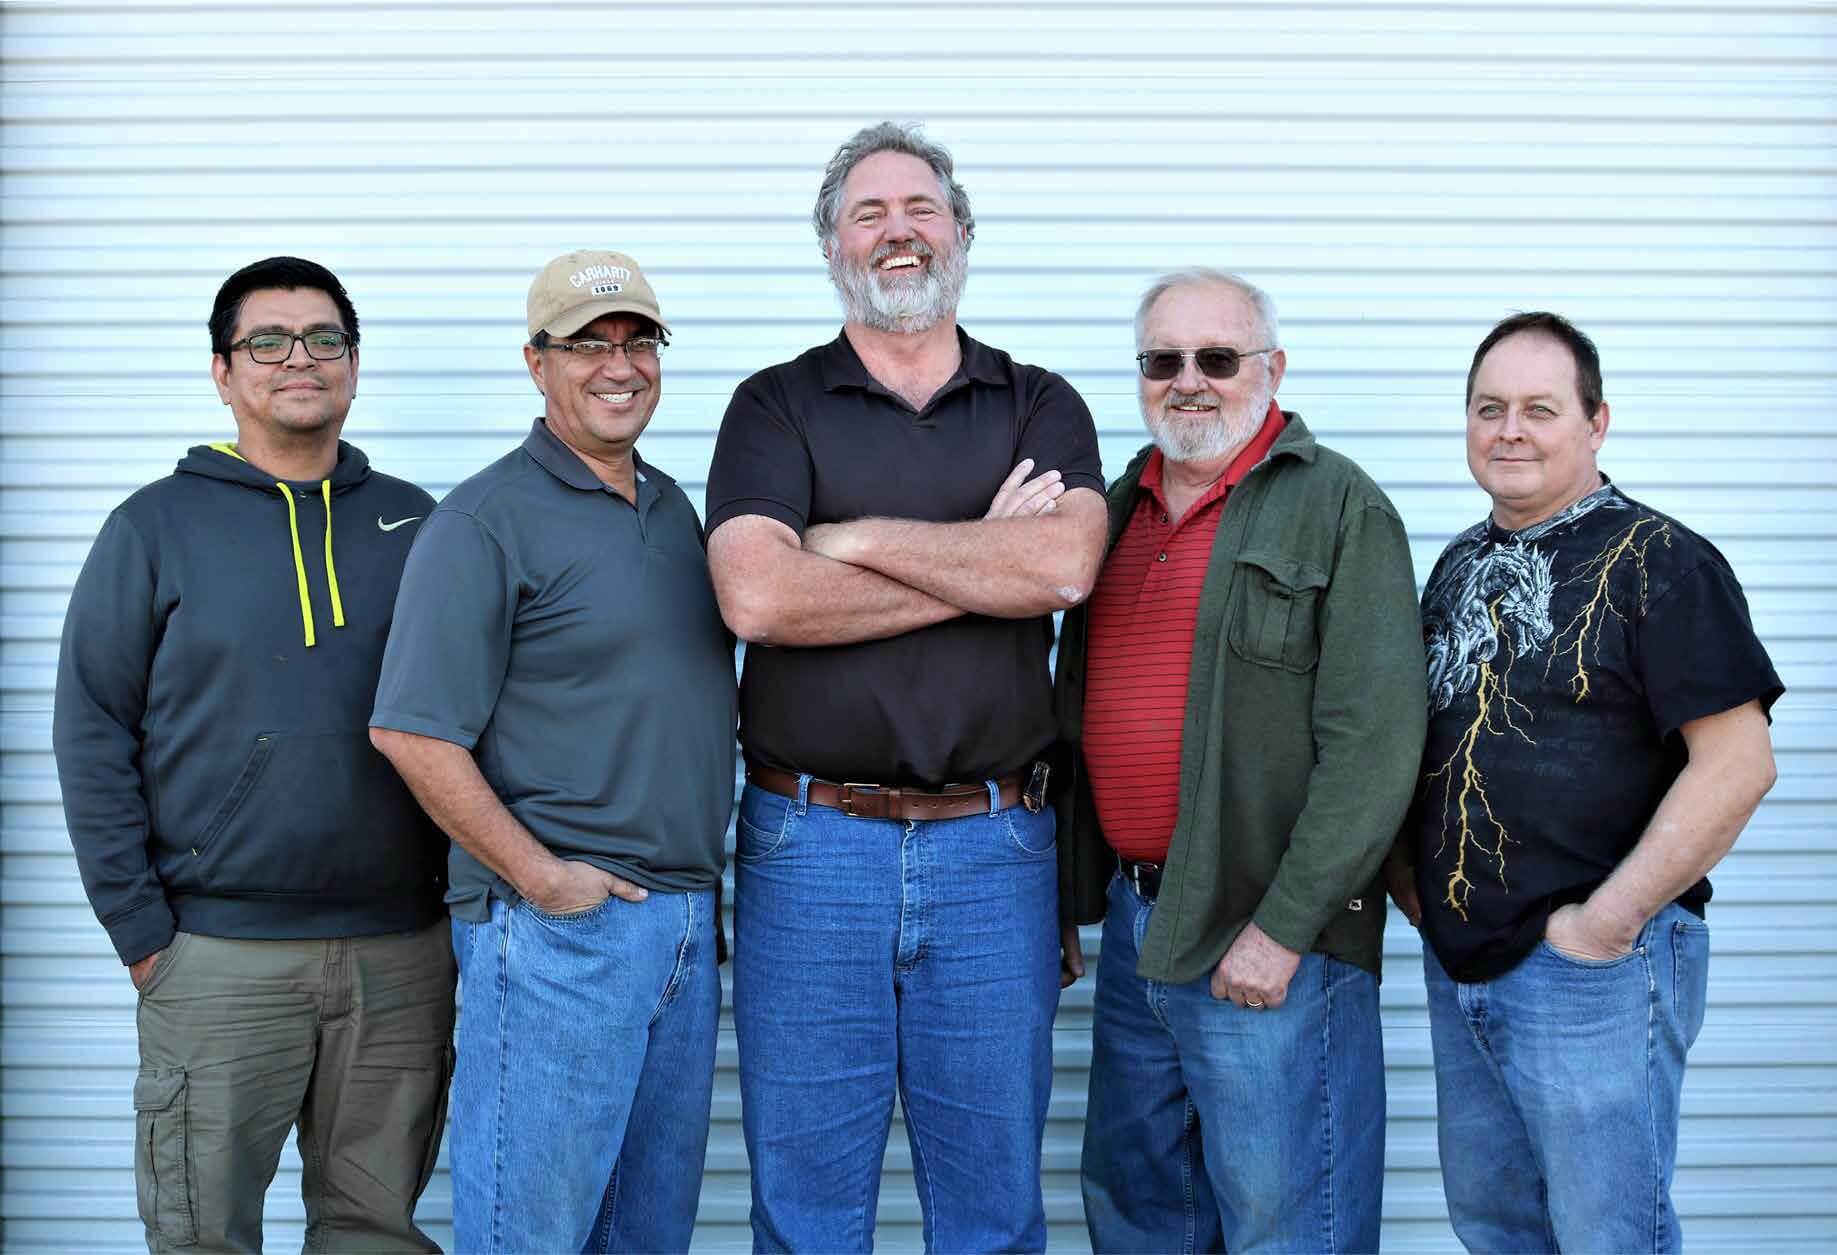 Image of Andy (Manager of Hydraulics), Mack (Manager of Fabrication), Jordan (President), Steve (Manager of Machine Shop), Mike (Manager of Chrome Plating)